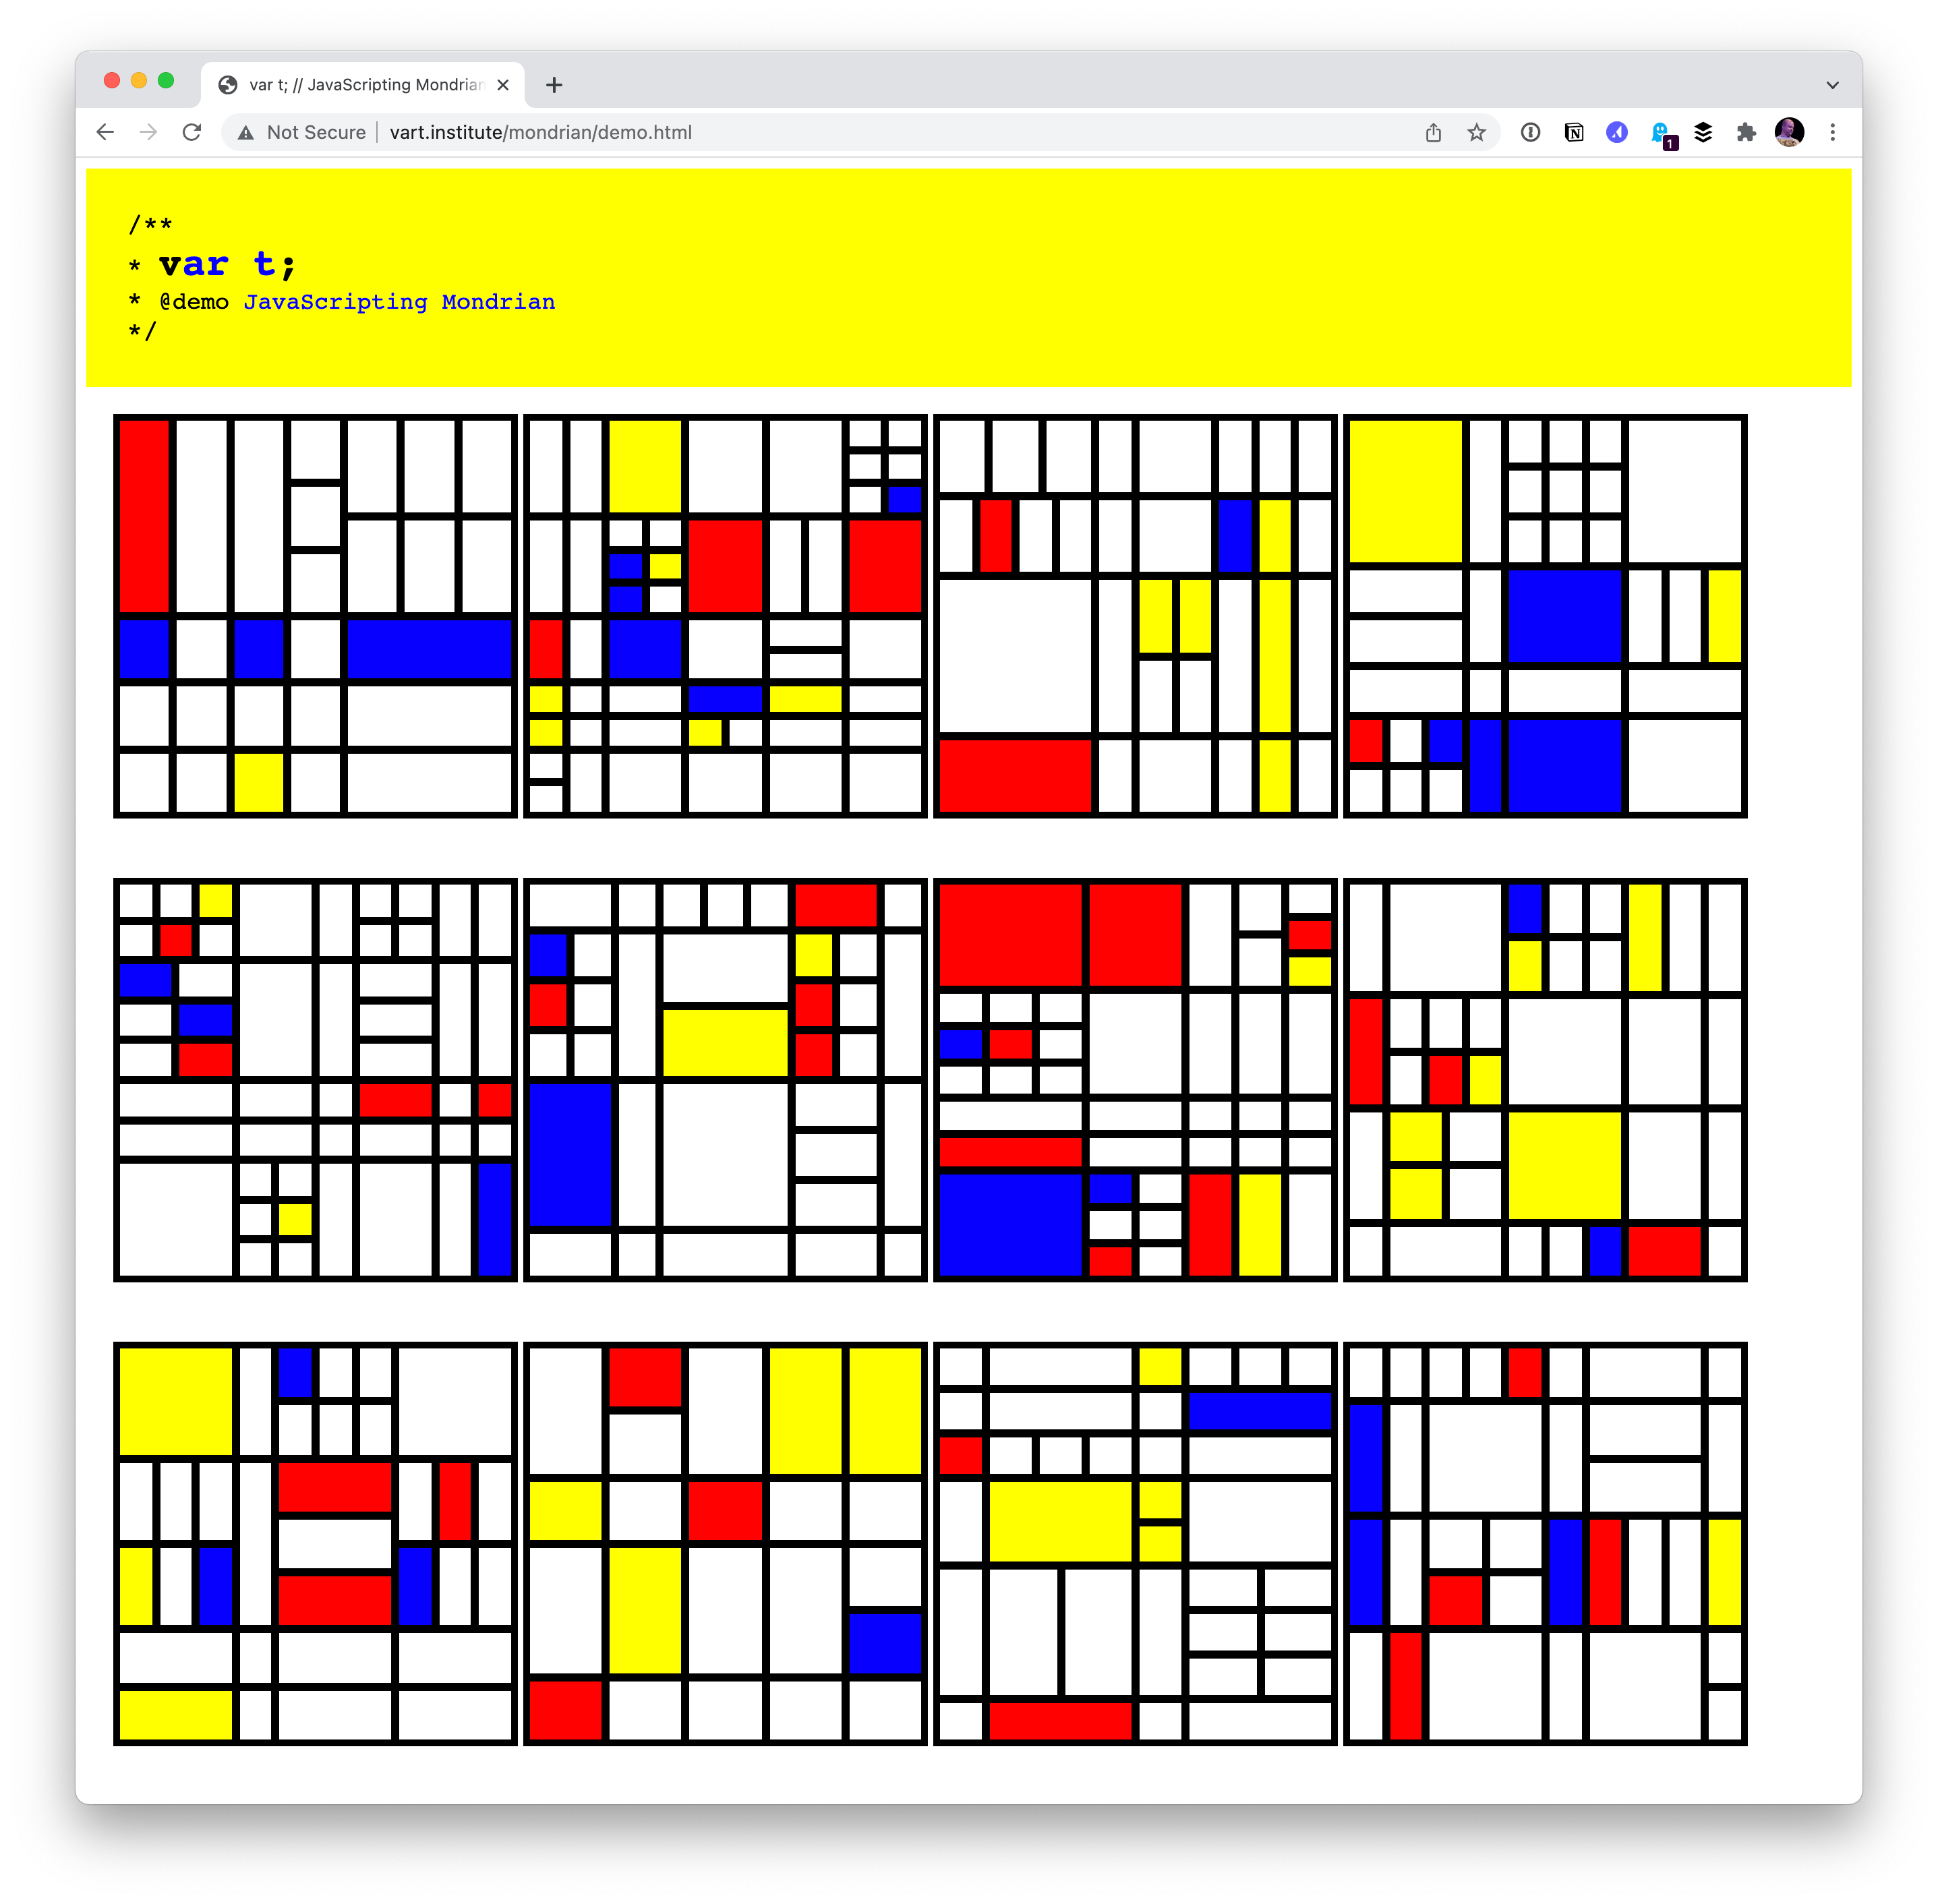 Mondrian Art in CSS randomized 12 times in a 4 by 3 grid of boxes. A bright yellow header is above the grid bearing the site title: var t.